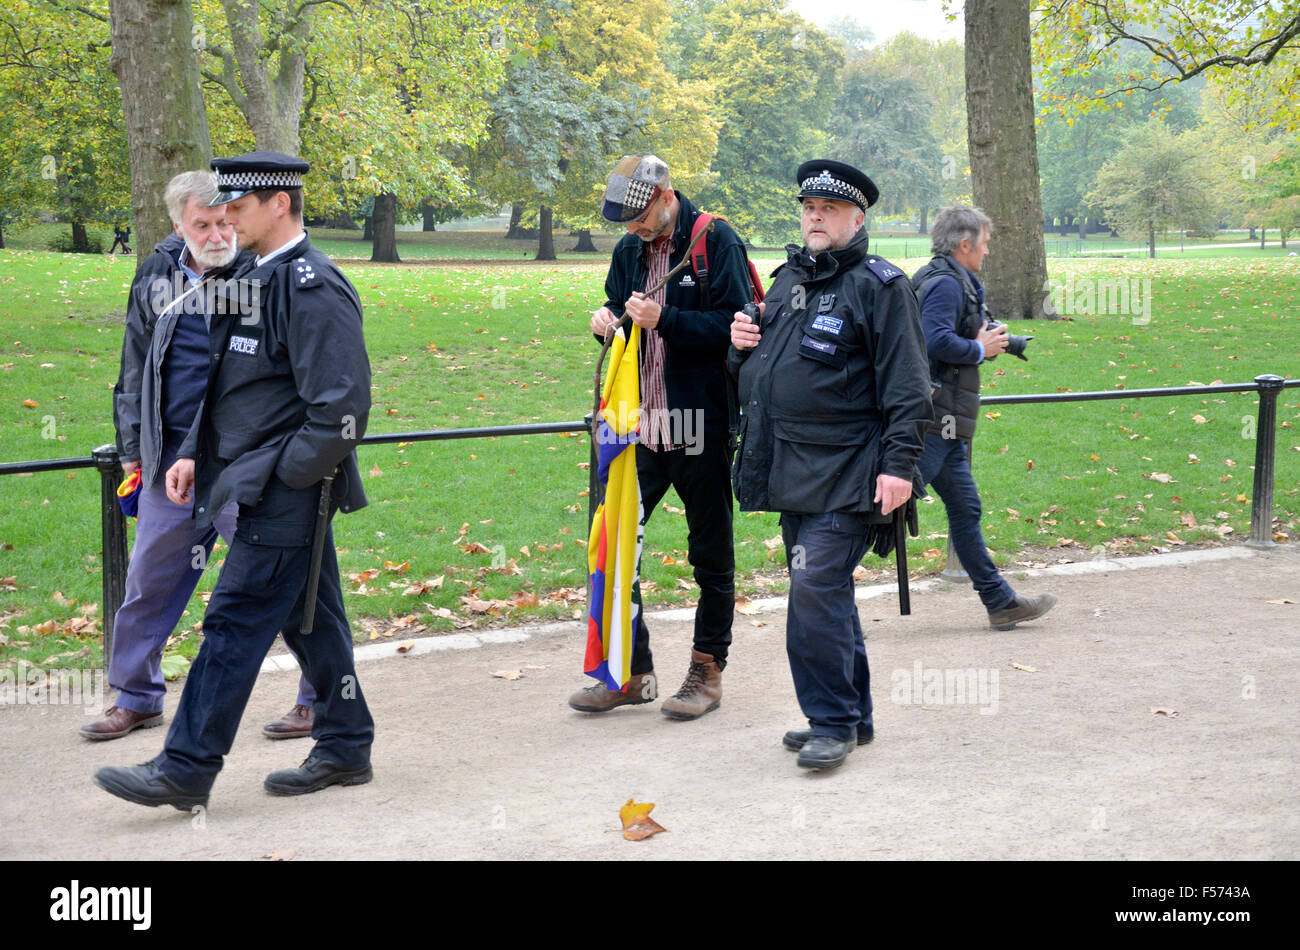 London. A protester with a Tibetan flag is led away by police before Chinese President Xi Jinping passes in the Mall - Oct 2015 Stock Photo